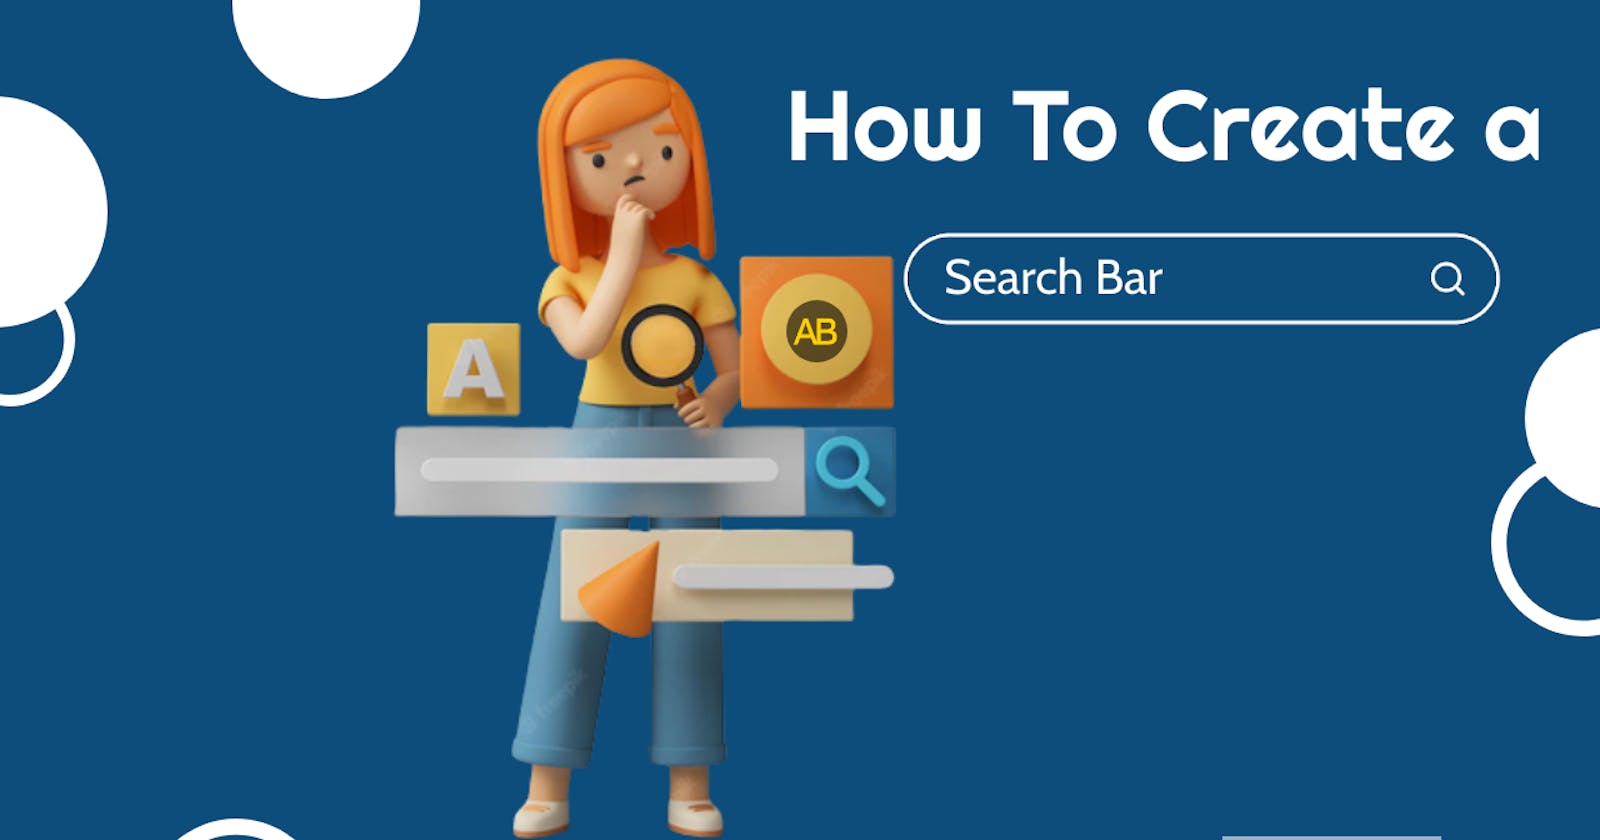 How To Create A Search Bar using HTML, CSS & JS